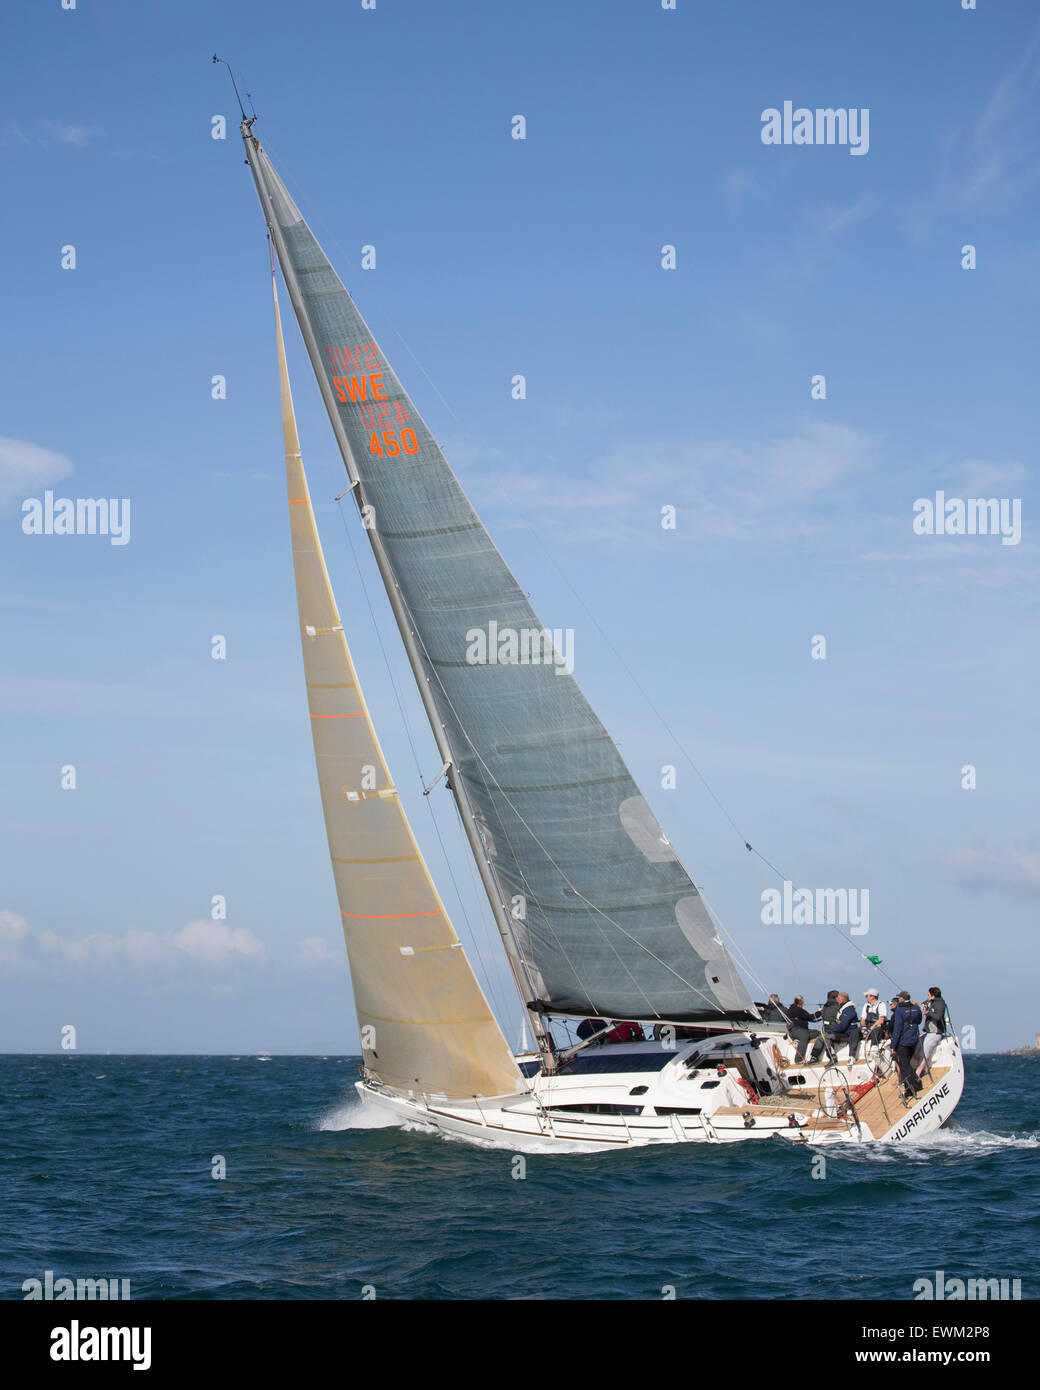 UK. 27th June, 2015. Elan 450 SWE 750 'Squire Patton Boggs' with celebrity skipper Helena Lucas MBE (Para-olympic gold medallist 2012) in the 2015 Round the Island Race Credit:  Niall Ferguson/Alamy Live News Stock Photo